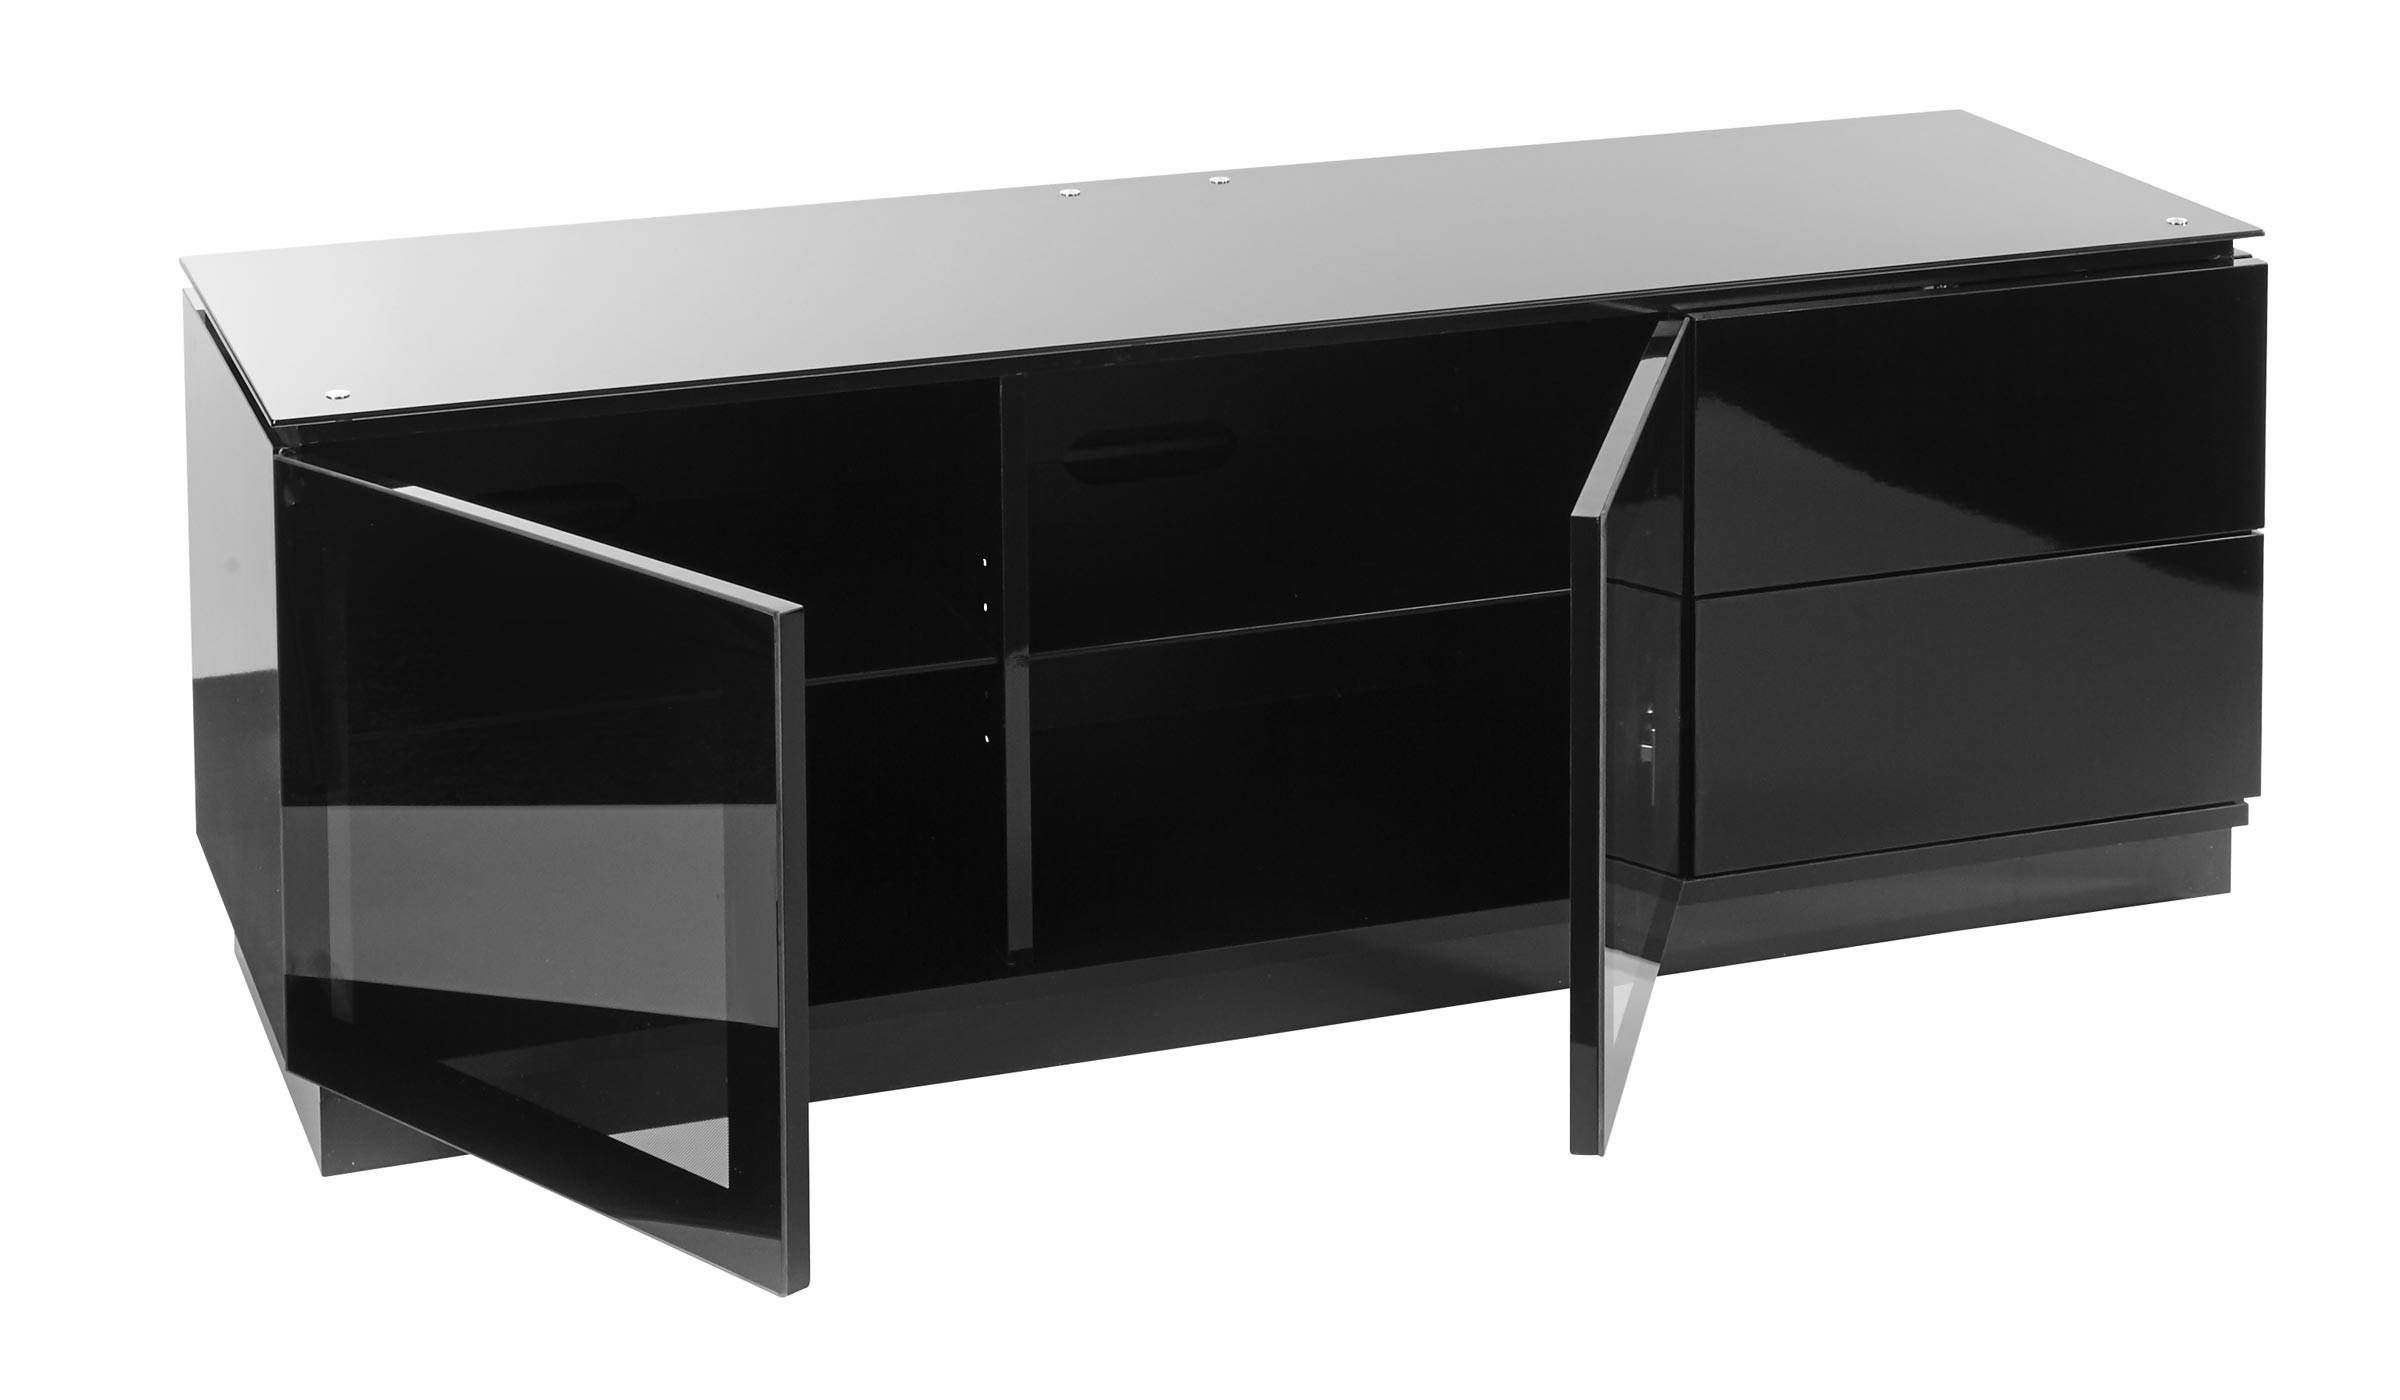 Black Gloss Tv Cabinet Up To 65" Tv | Casino Mmt C1500b Throughout Tv Cabinets With Storage (View 15 of 15)